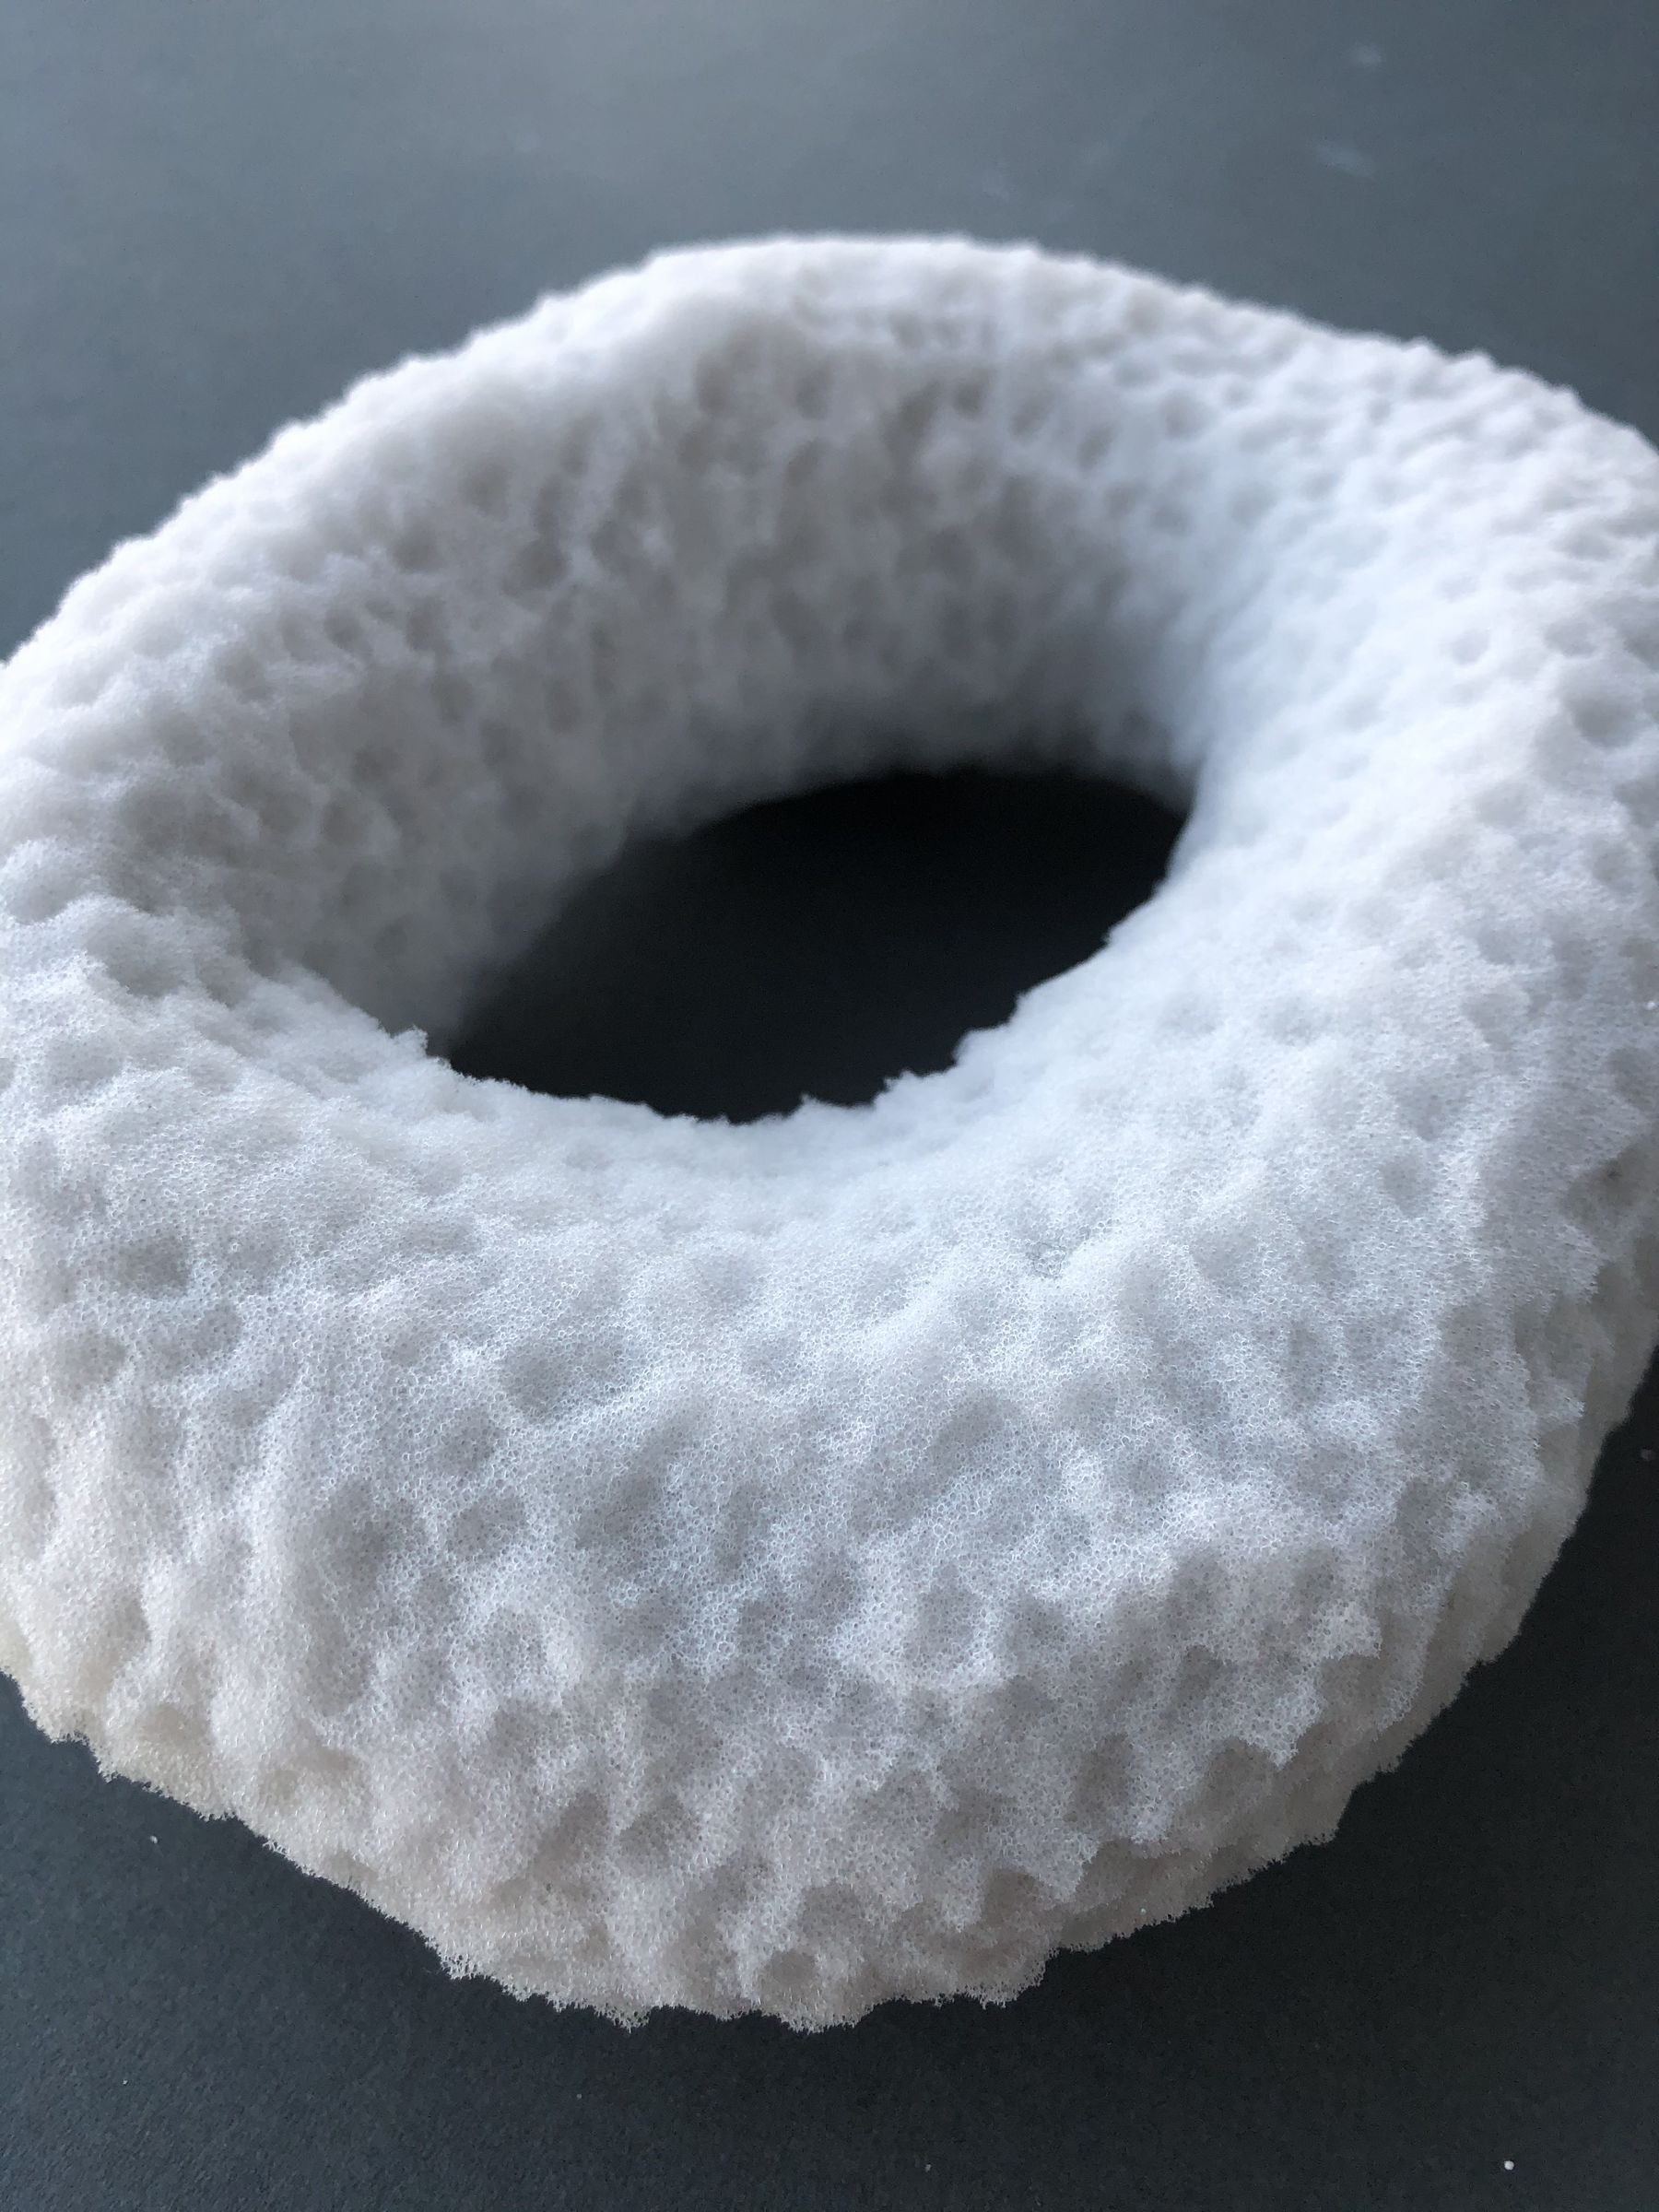 round doughnut looking experimentation with foam